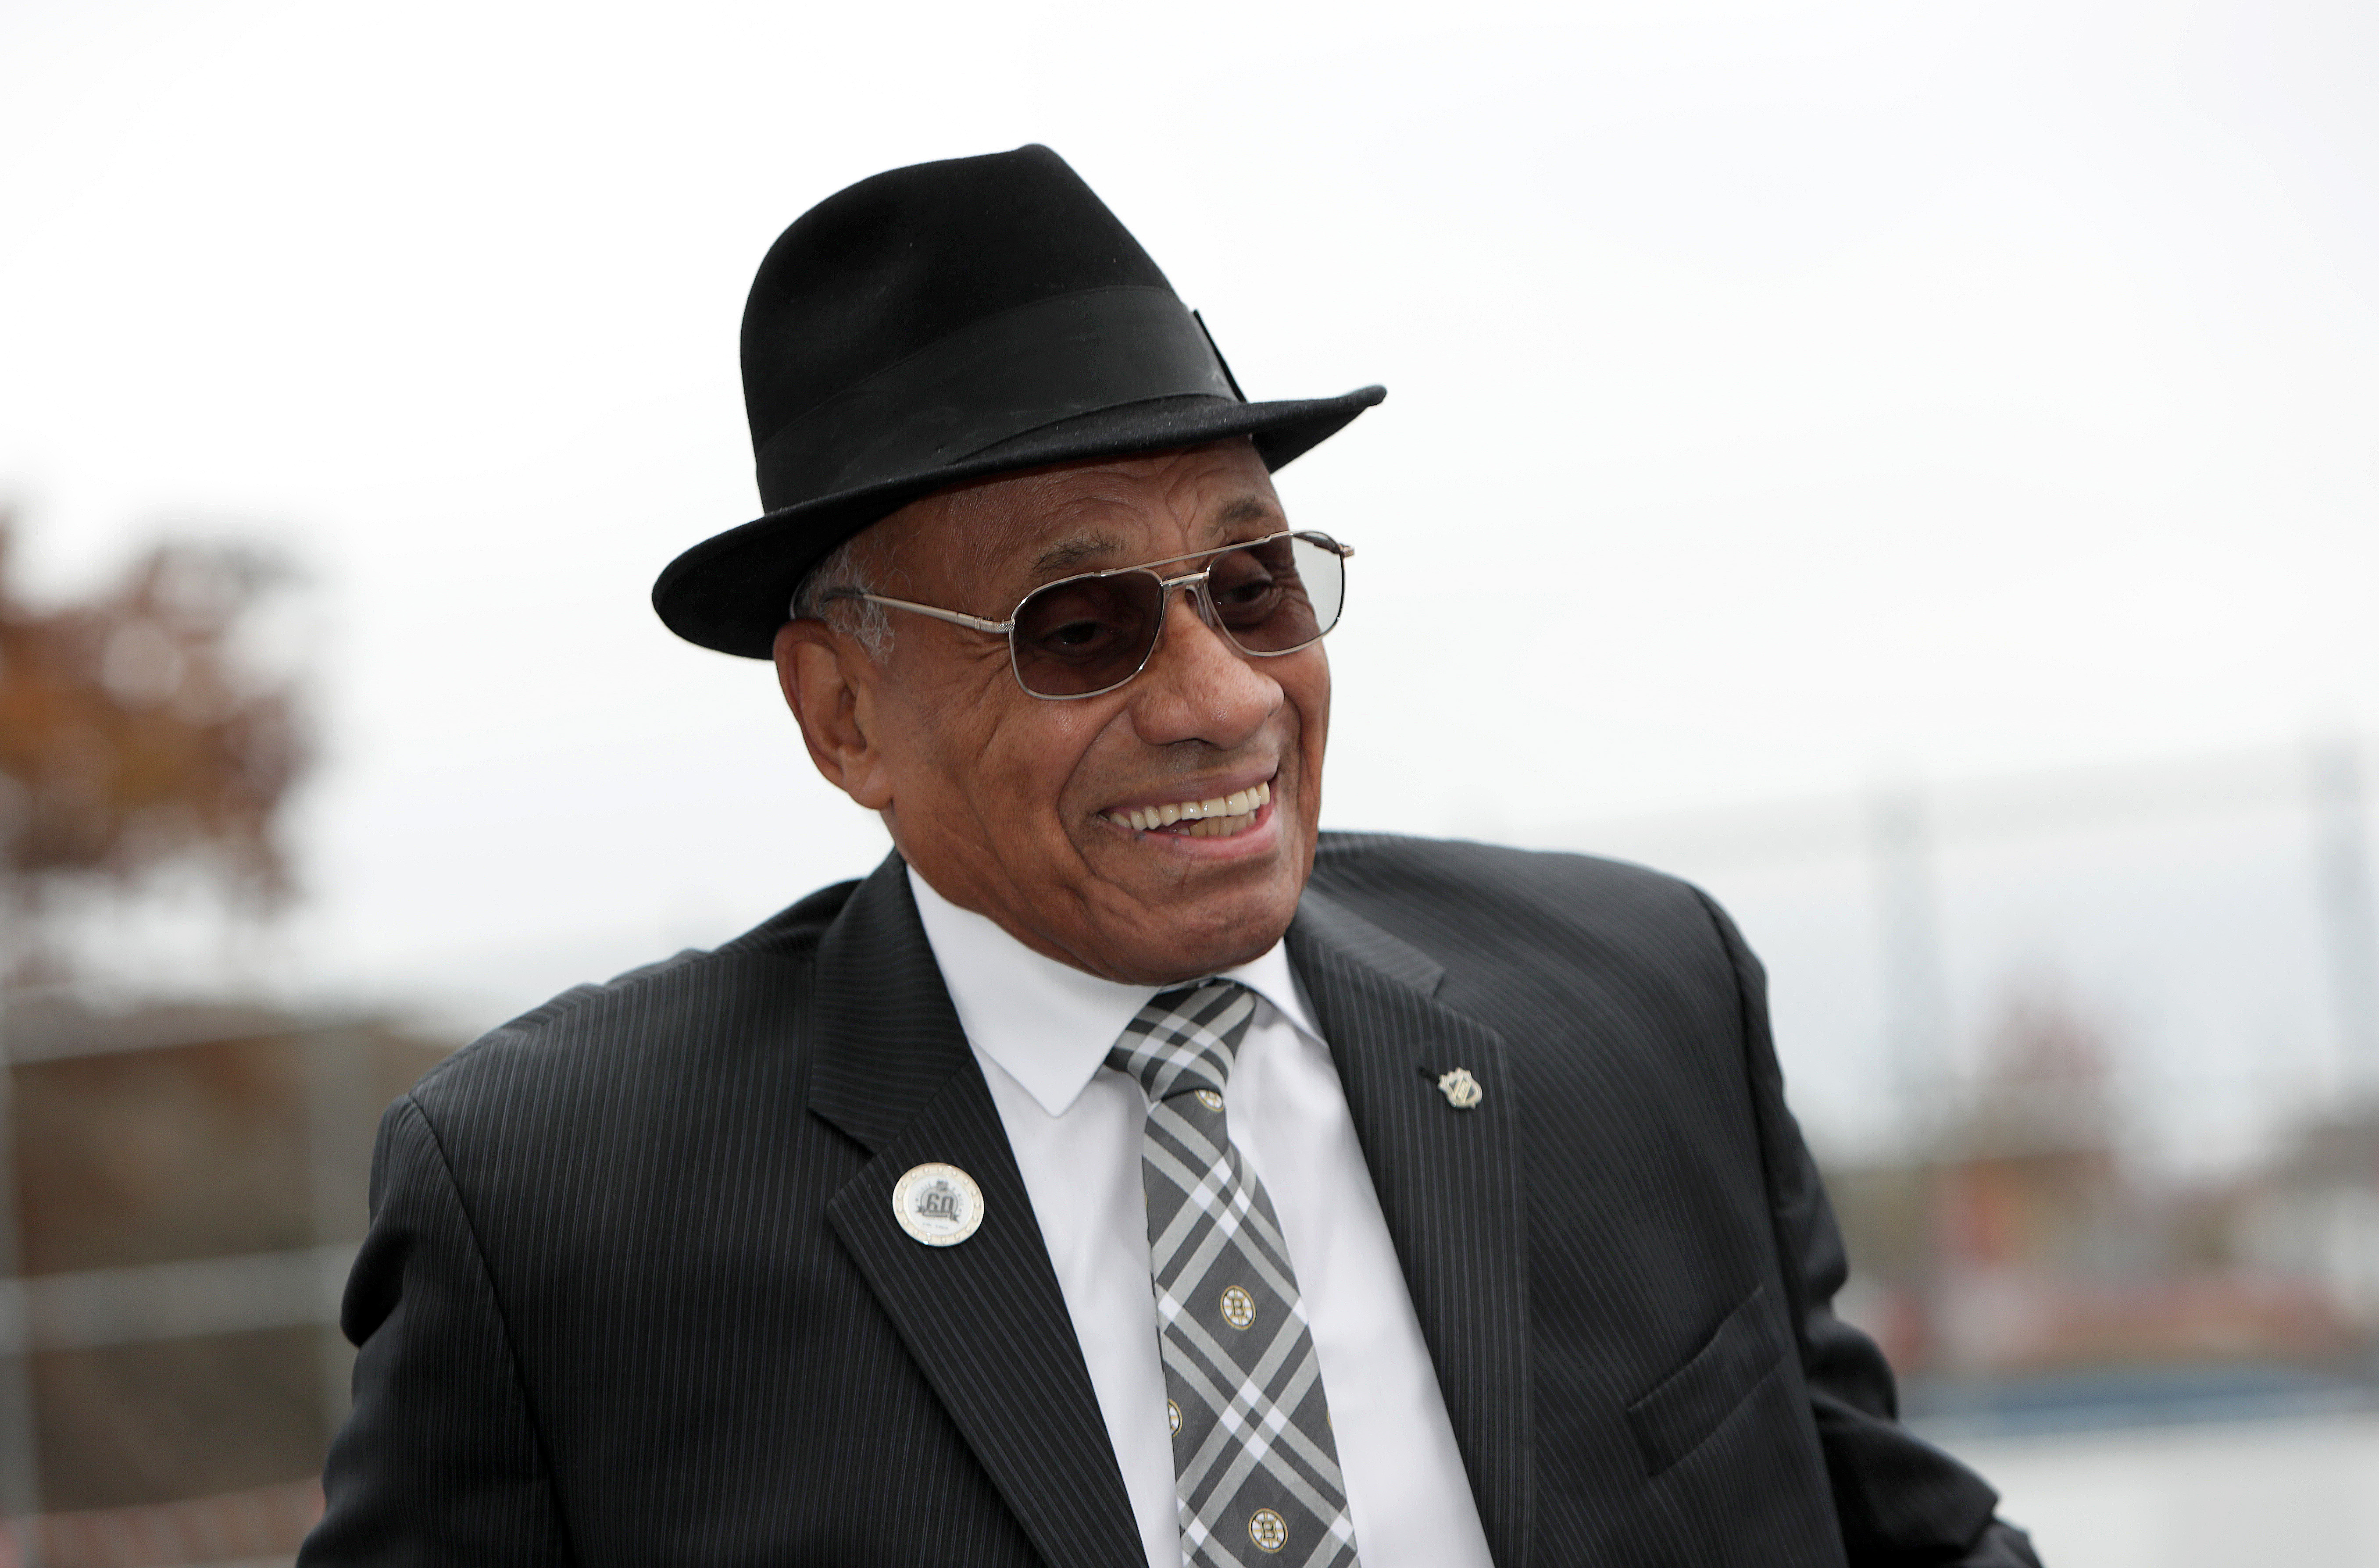 More than a number: Boston Bruins retire jersey of Canadian Willie O'Ree,  NHL's first Black player